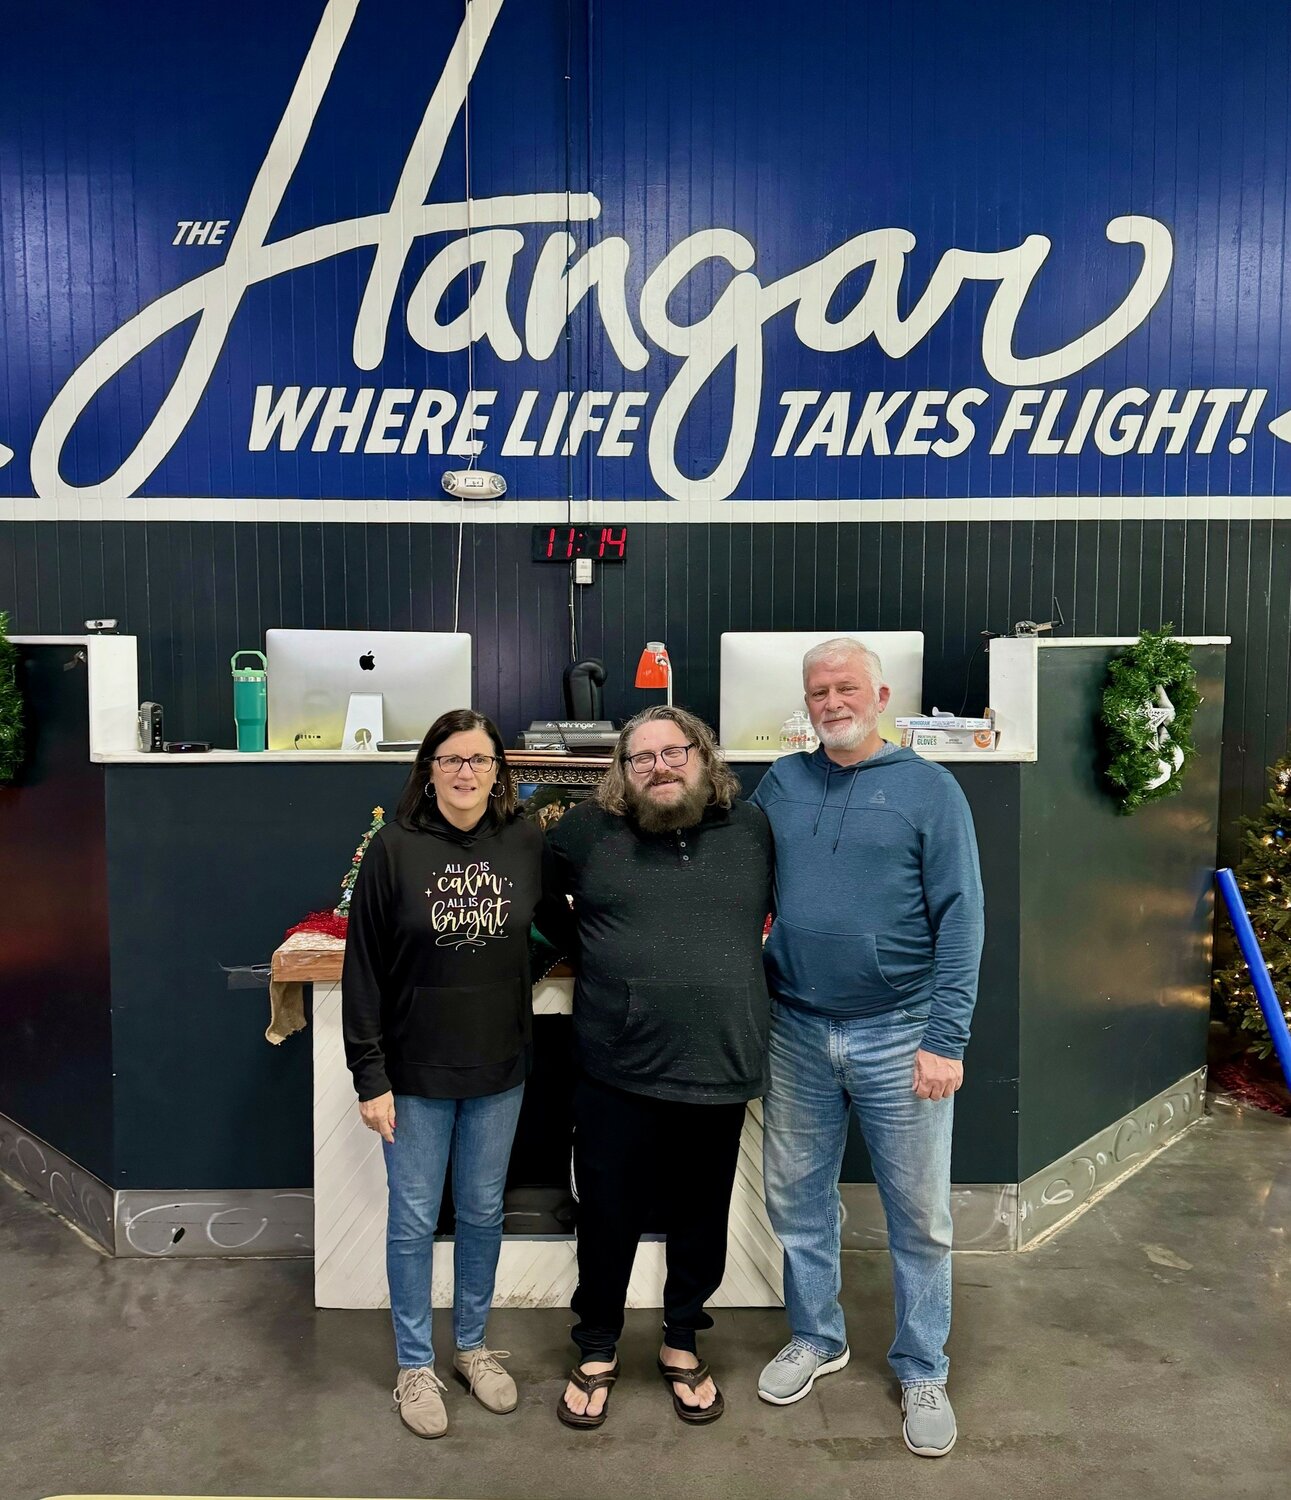 Mosaic House of Prayer held its 18th Annual Toy Blessing at the Hangar Unity Center in Brookshire on November 28th. Pictured are (left to right) Vickii Watson, Cassidy Campbell and Mark Watson. The Hangar, a nonprofit organization offering a variety of services to the community including activities for teens, resources for families in need and a variety of local events throughout the year for residents of southern Waller County, is located at 4010 4th St. in Brookshire.